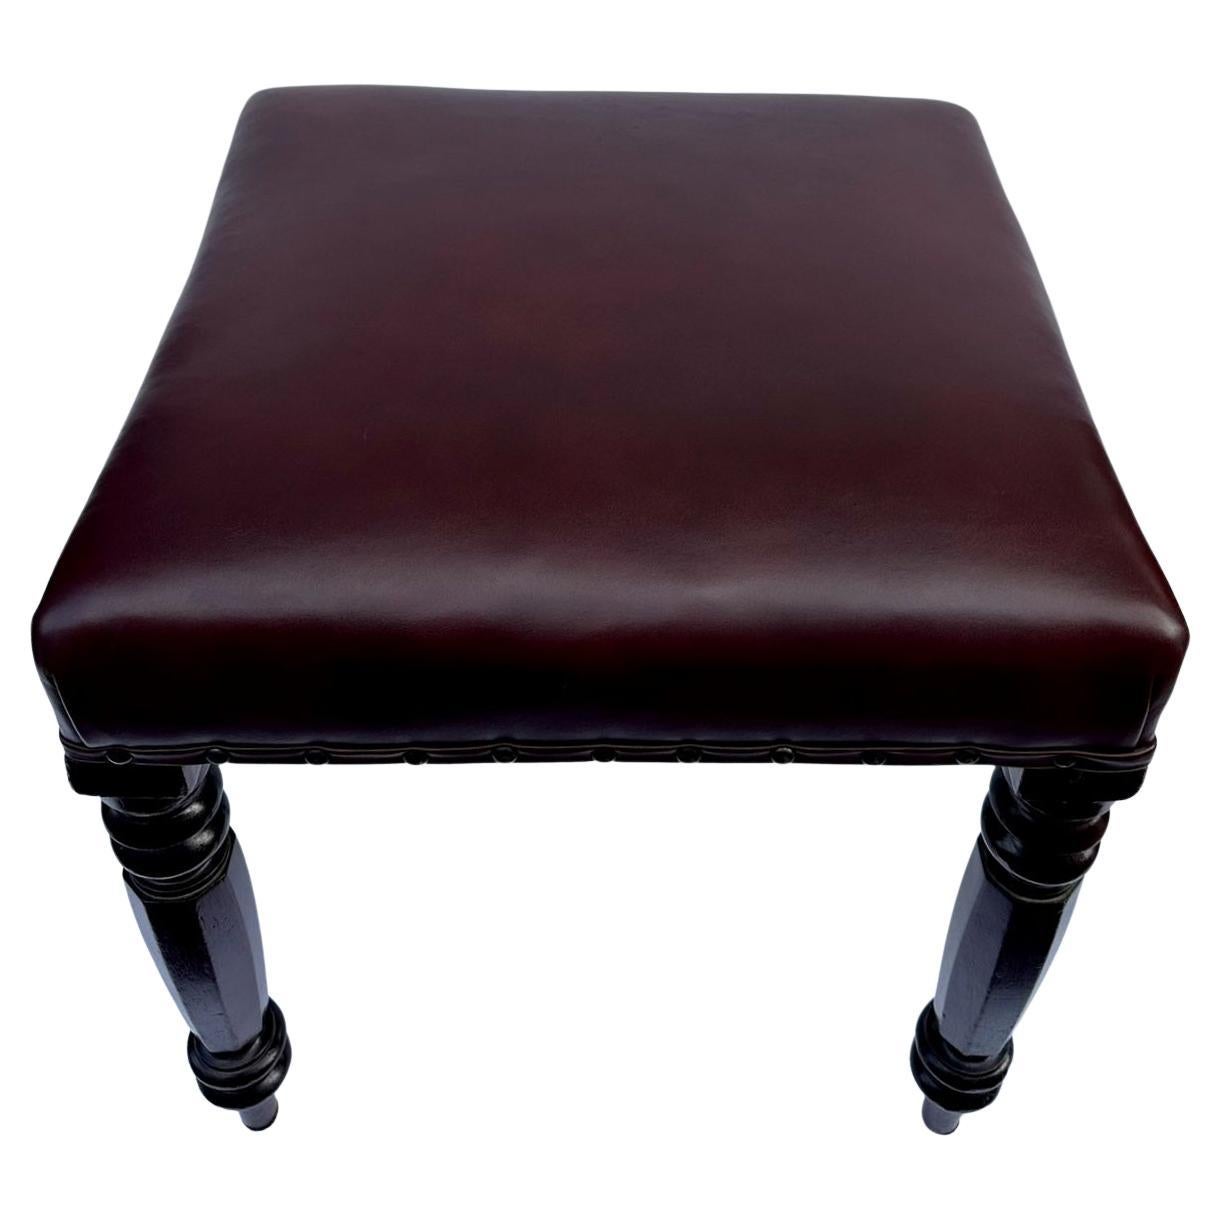 Polished Pair Antique English Victorian Carved Mahogany Leather Upholstered Stools 19 Ct. For Sale